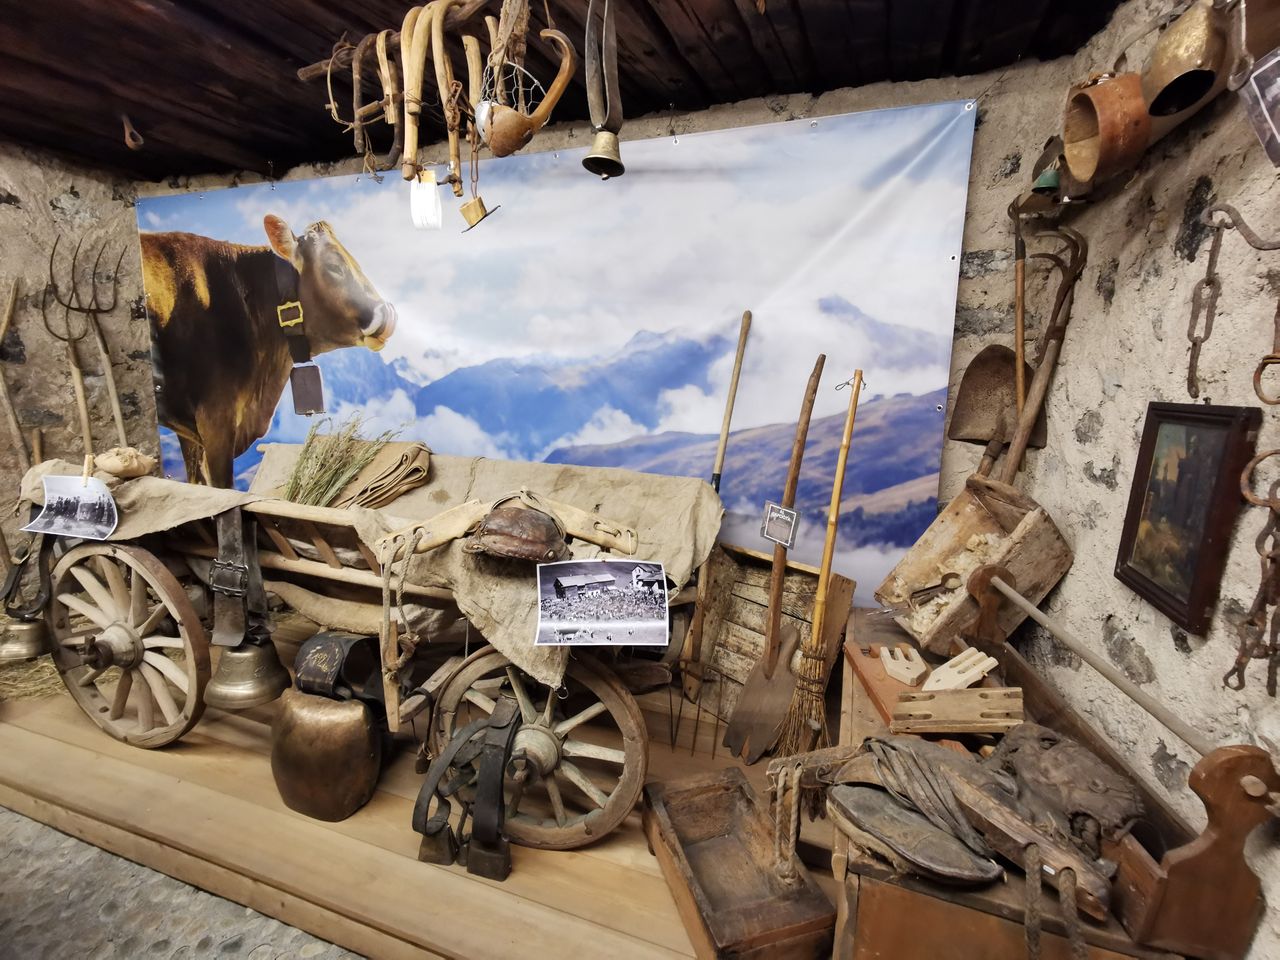 In the Livigno museum, you can learn about the history of the town.